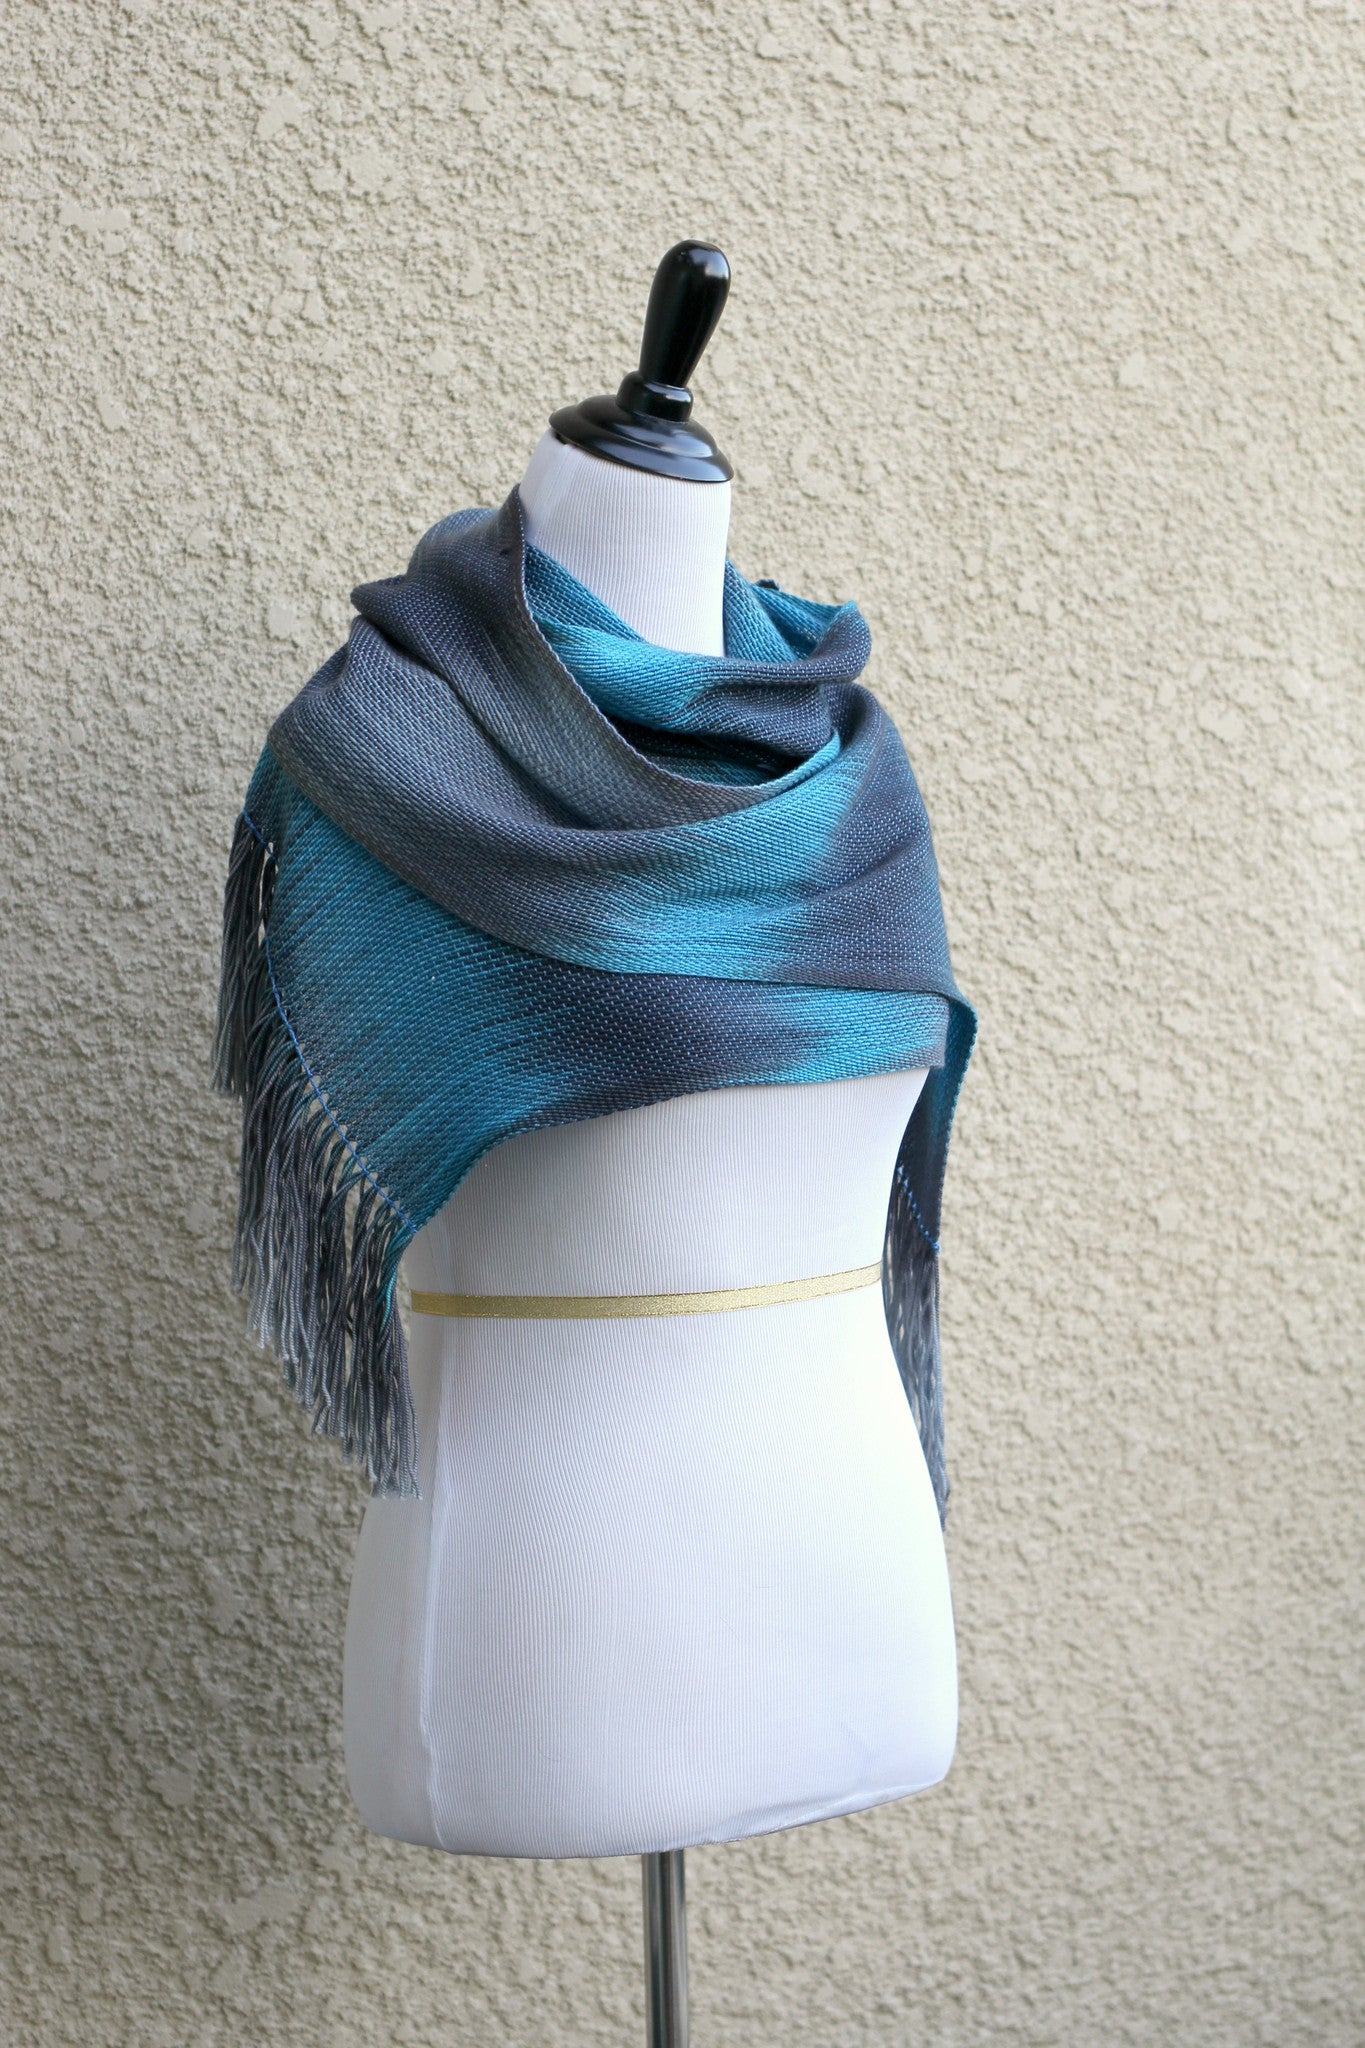 Blue and grey scarf